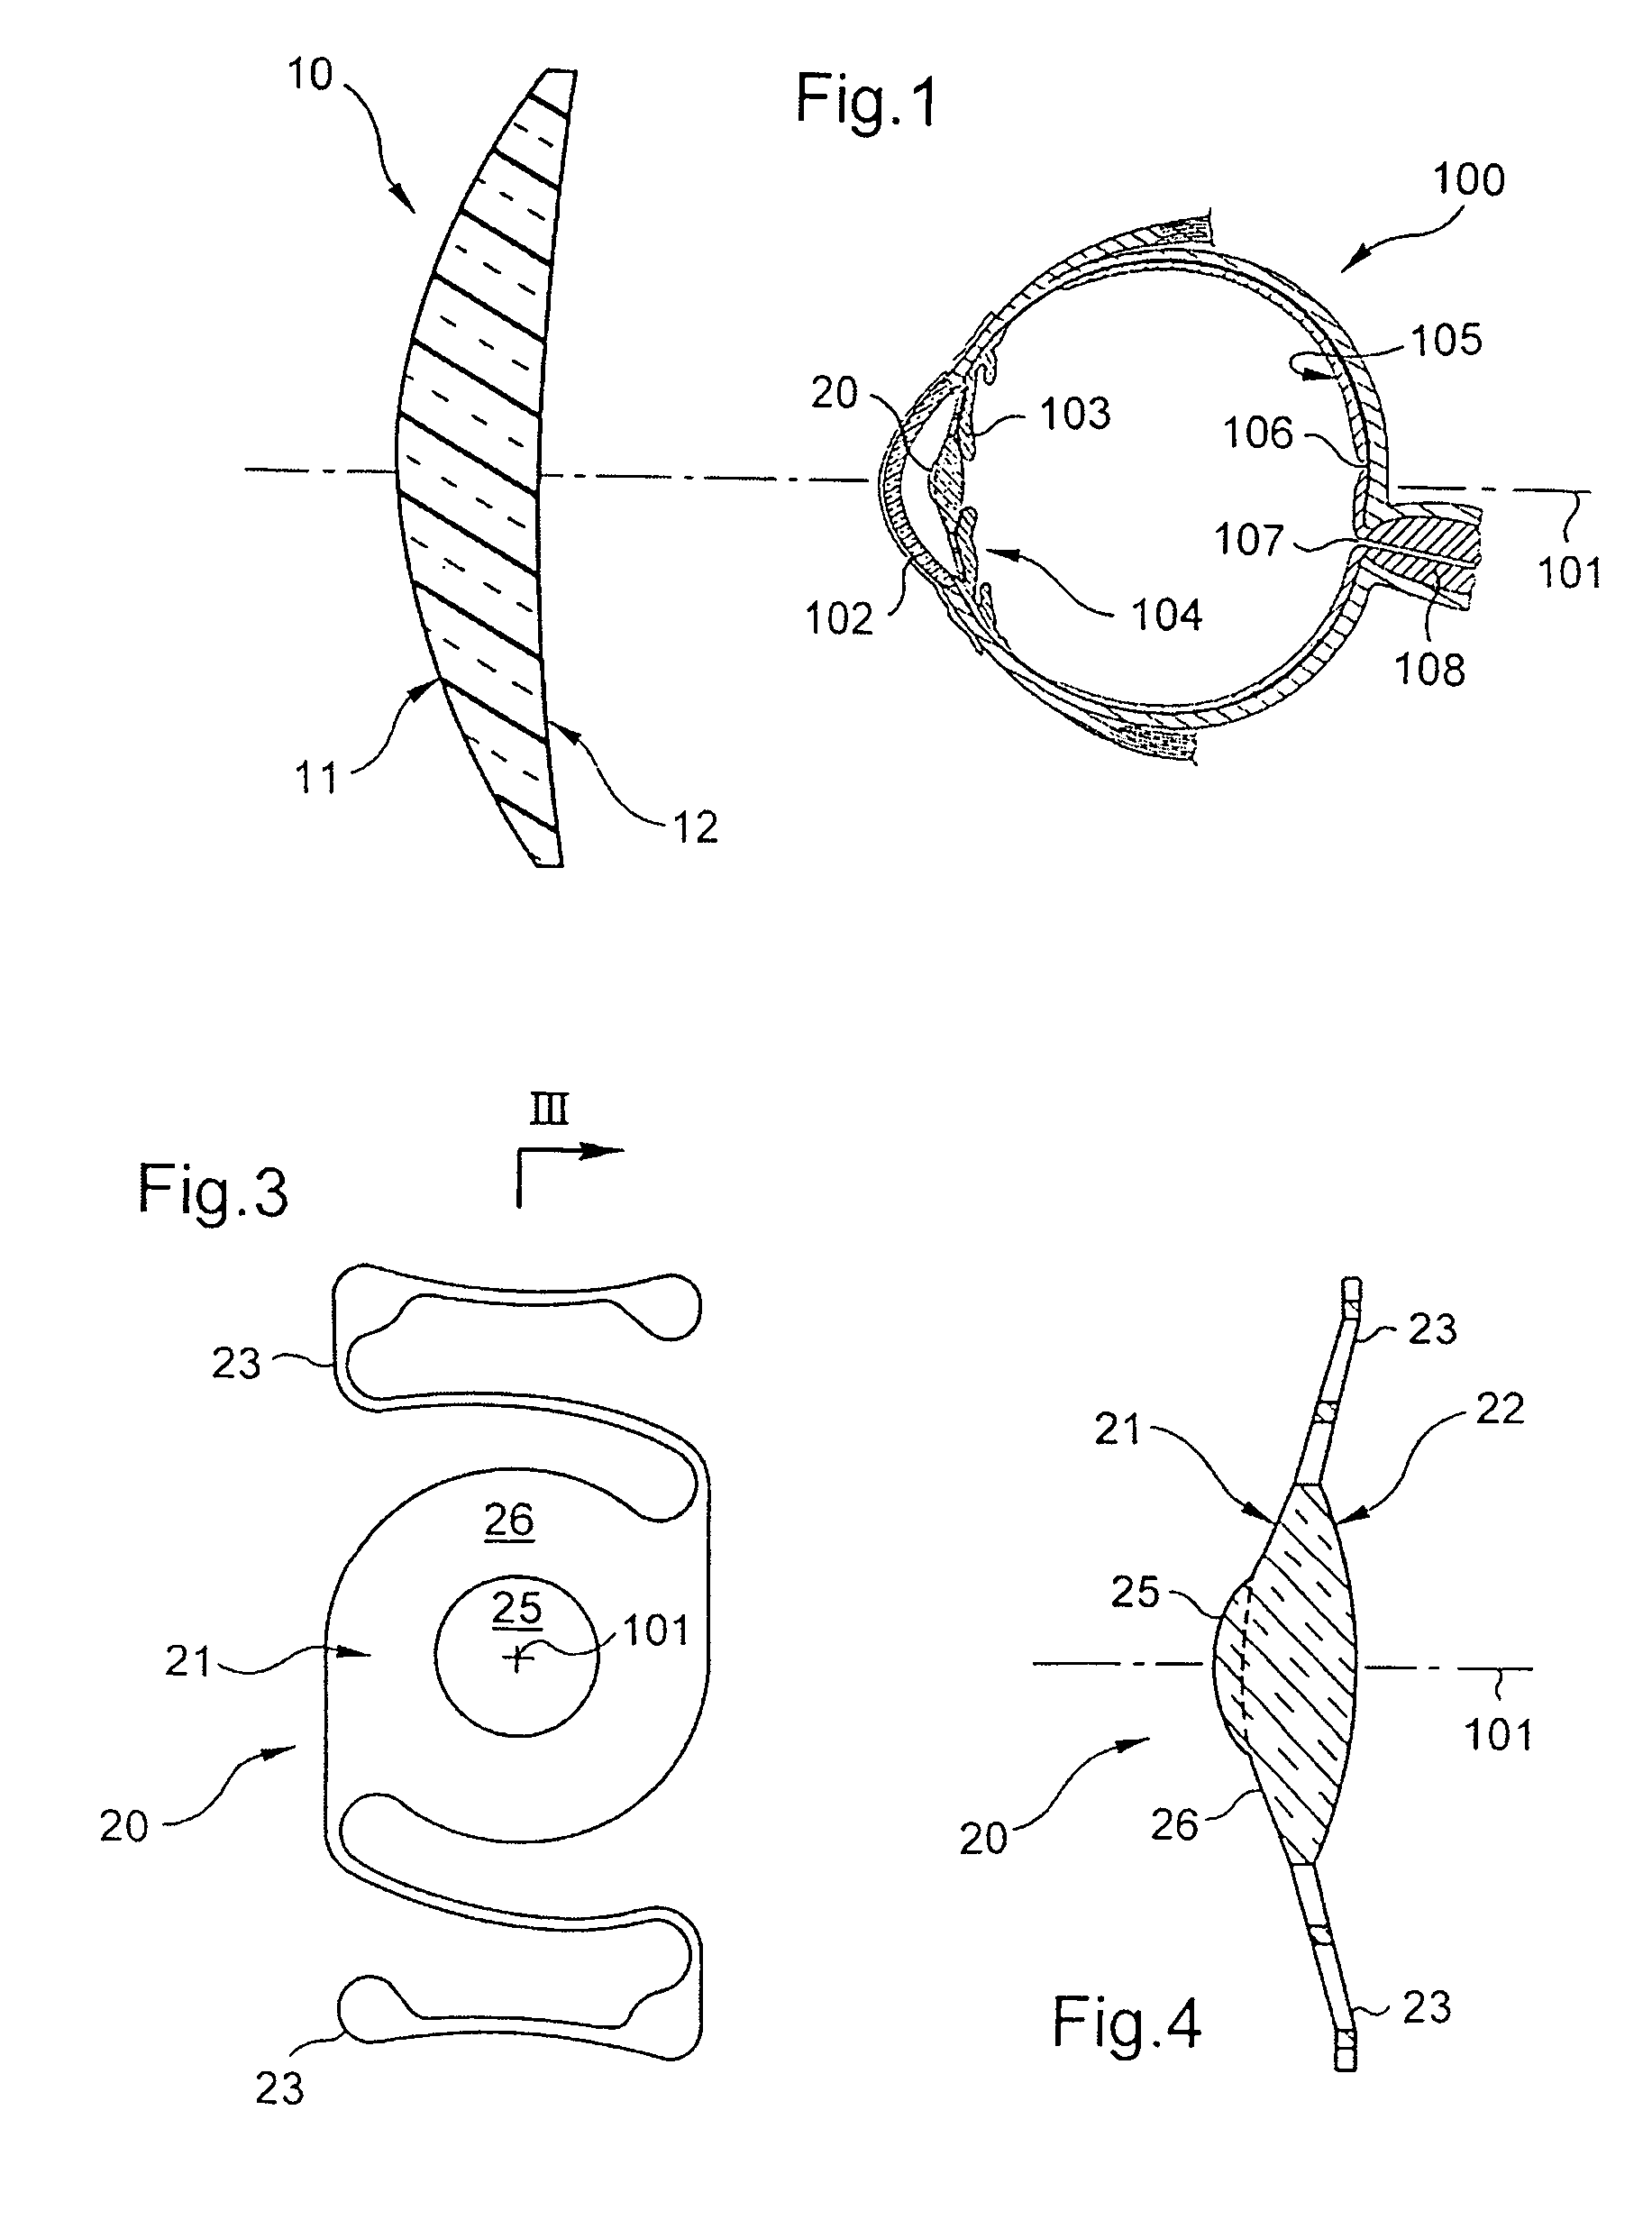 Optical accommodative compensation system